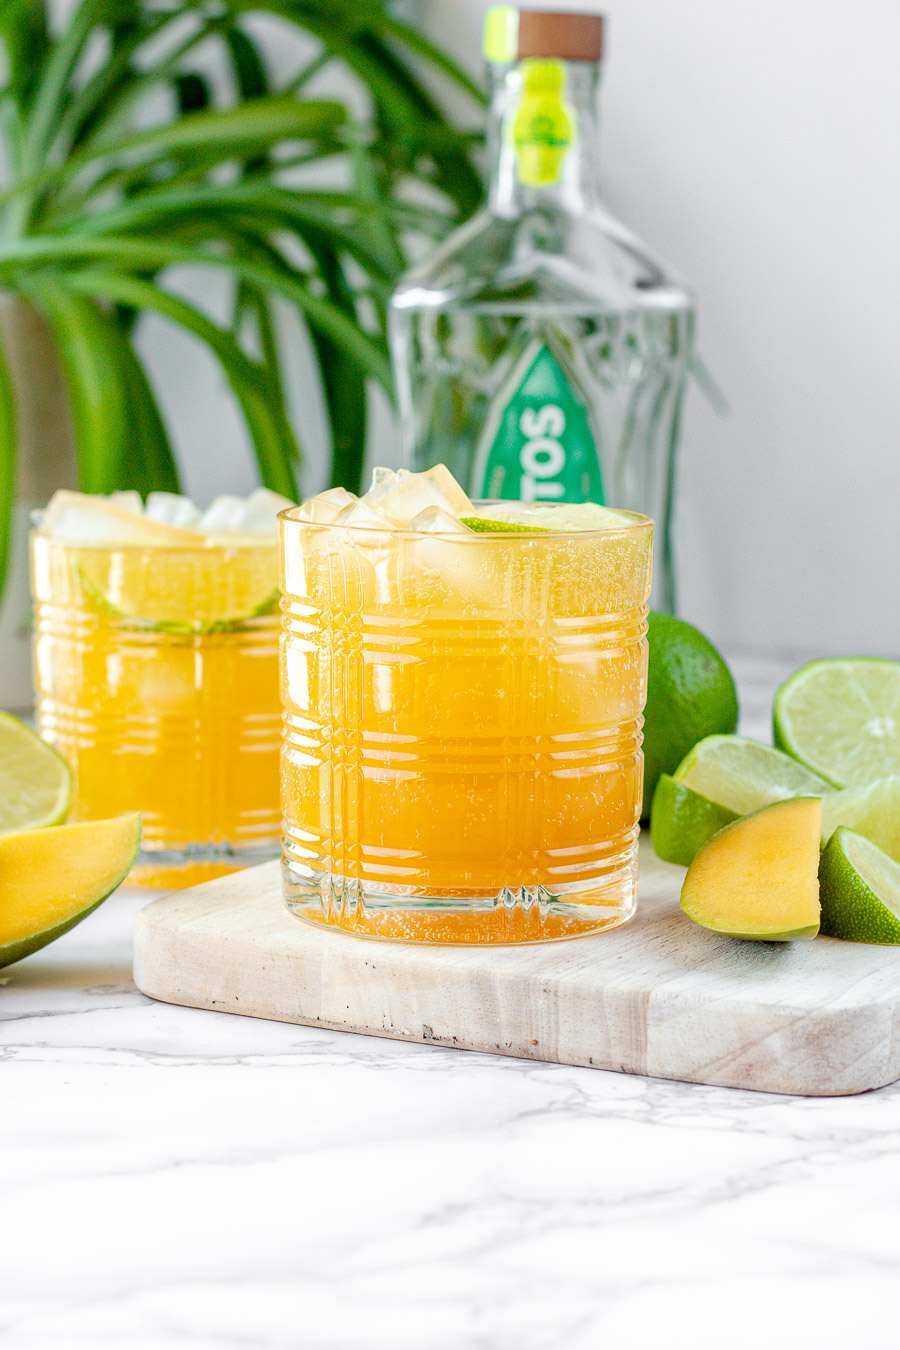 This 1800 Ultimate Mango margarita copycat recipe is one of my favorite go-to margarita recipes. What makes it so easy is the use of Mango kombucha or your favorite mango fruit juice. This is definitely a mix between a mango margarita recipe and a mango Paloma recipe. It is the perfect balance of mango and tequila.